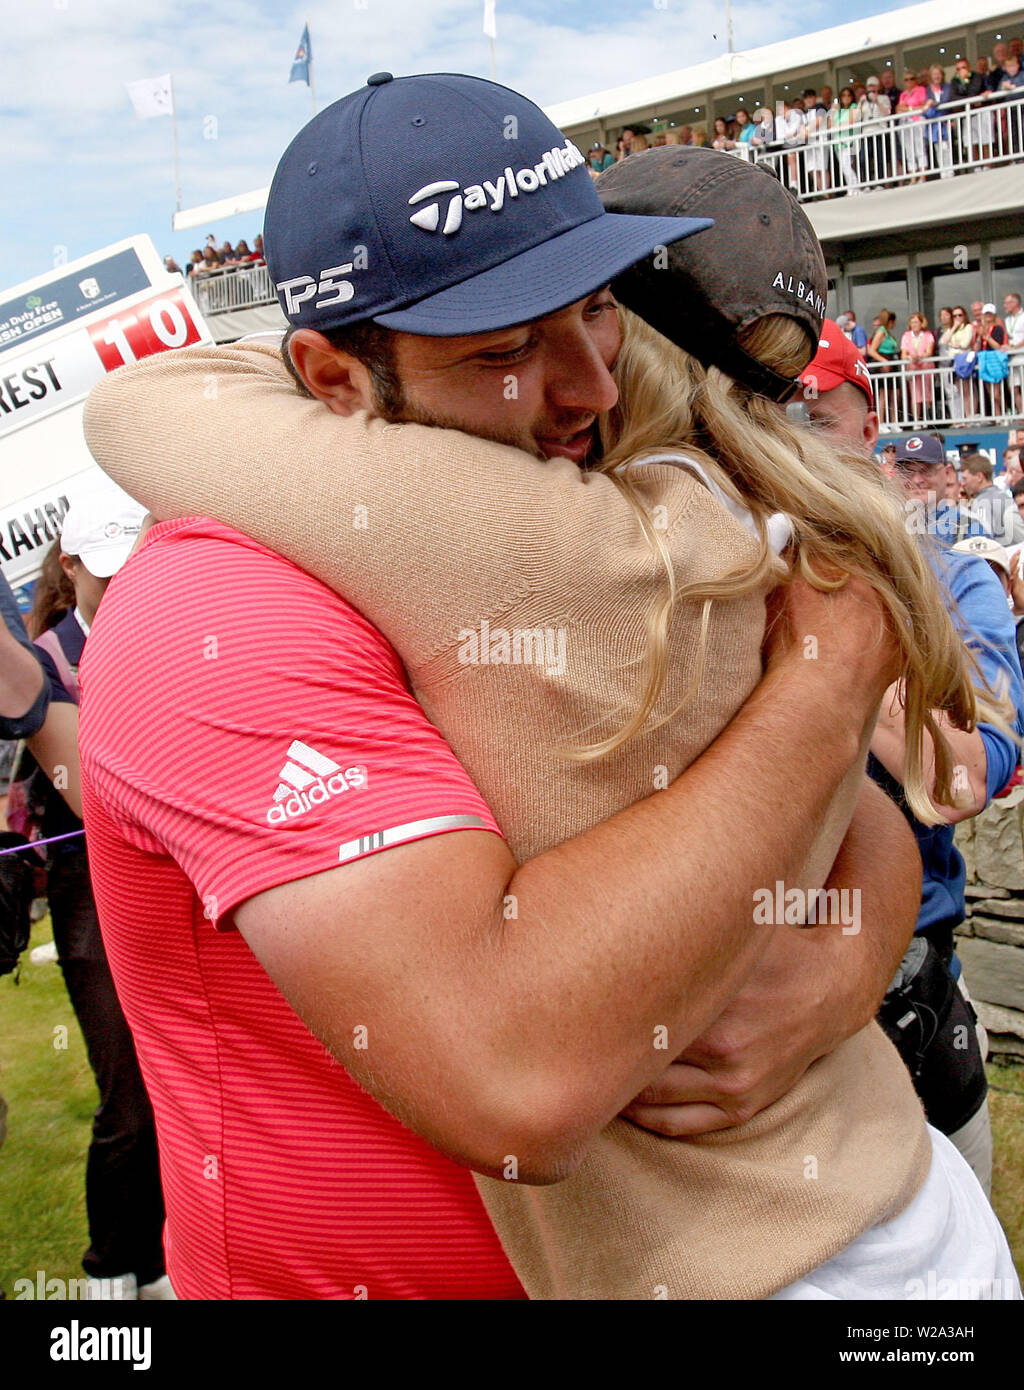 Spain's Jon Rahm with his girlfirnd Kelley Cahill at the end of his round during day four of the 2019 Dubai Duty Free Irish Open at Lahinch Golf Club. Stock Photo